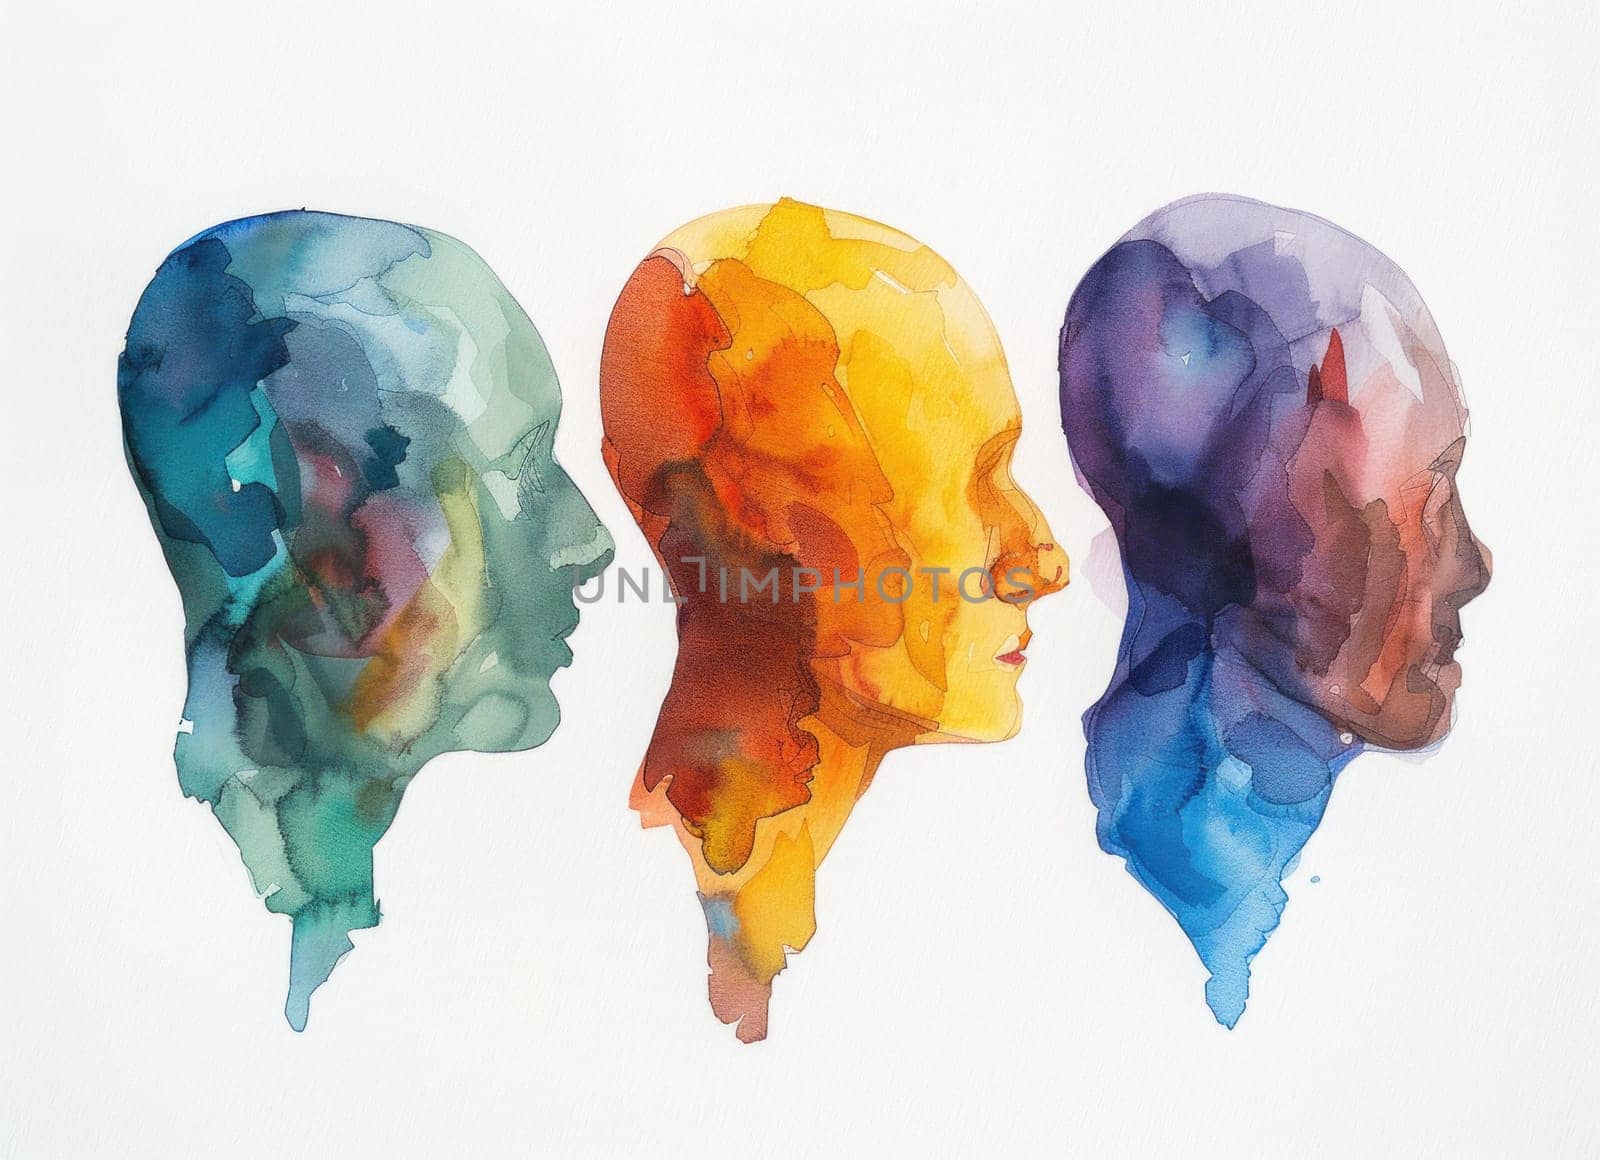 Watercolor paintings of diverse heads in various colors on white background, artistic beauty and diversity theme